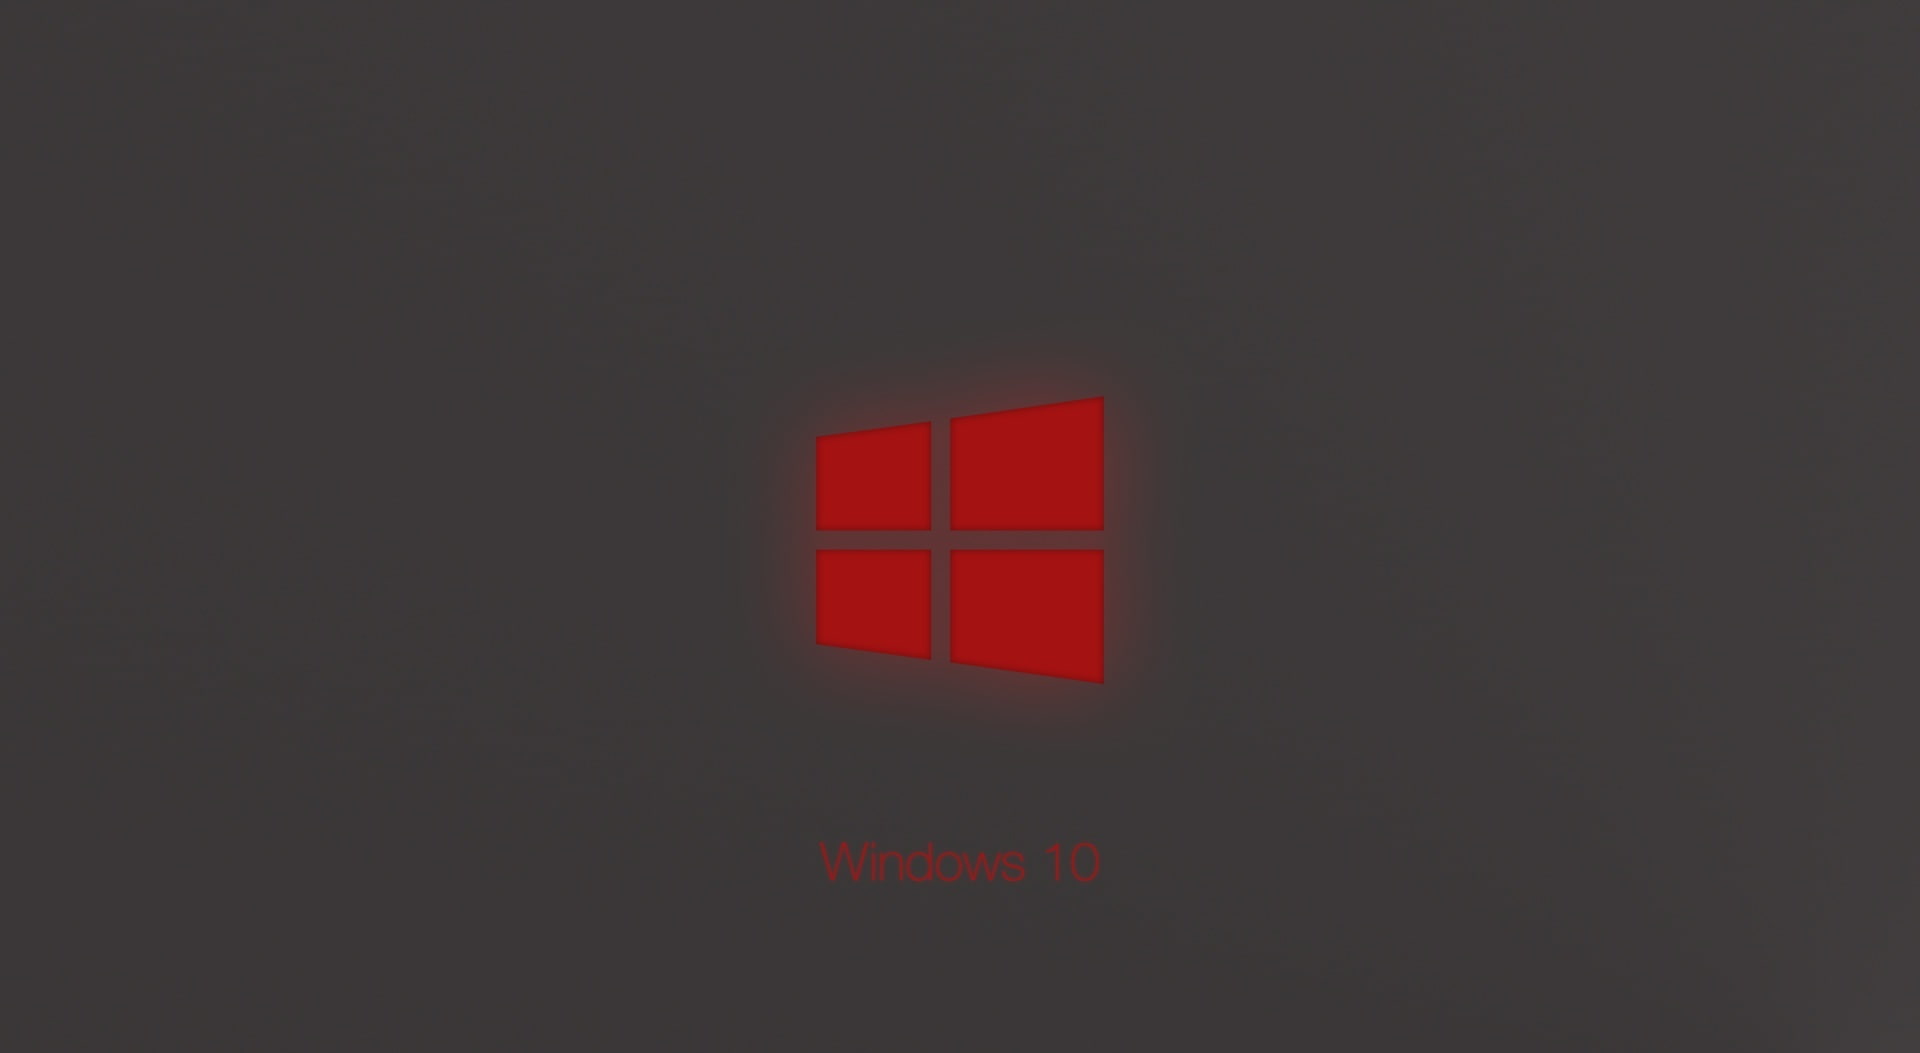 Windows 10 Technical Preview Red Glow, red Windows logo wallpaper